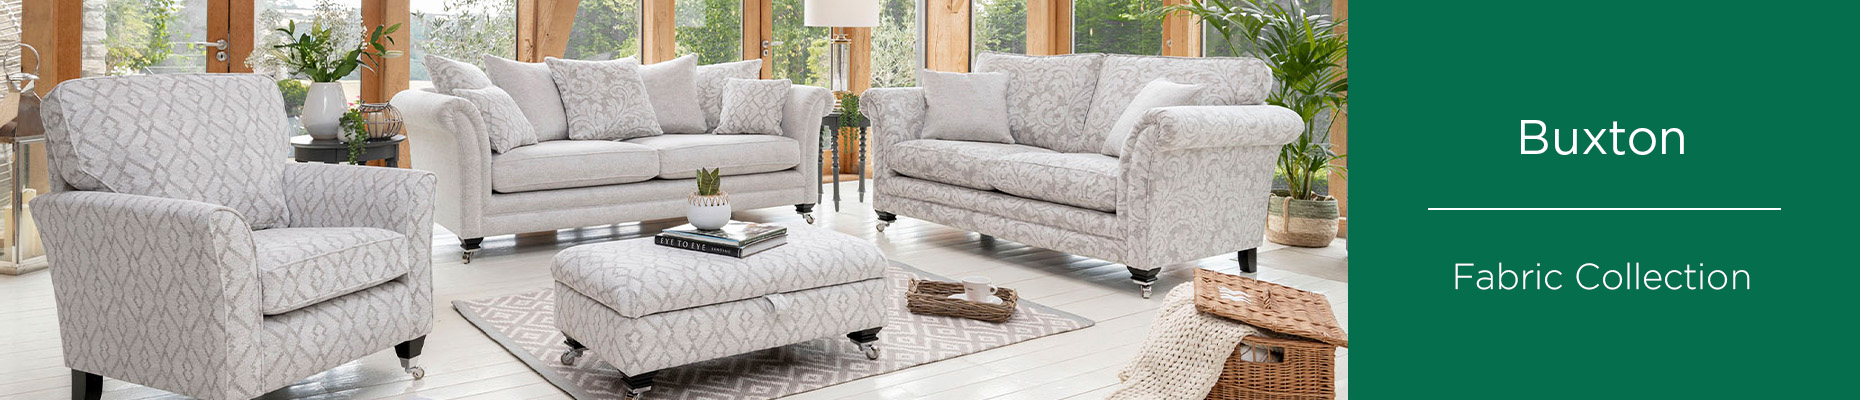 Buxton sofa collection at Forrest Furnishing